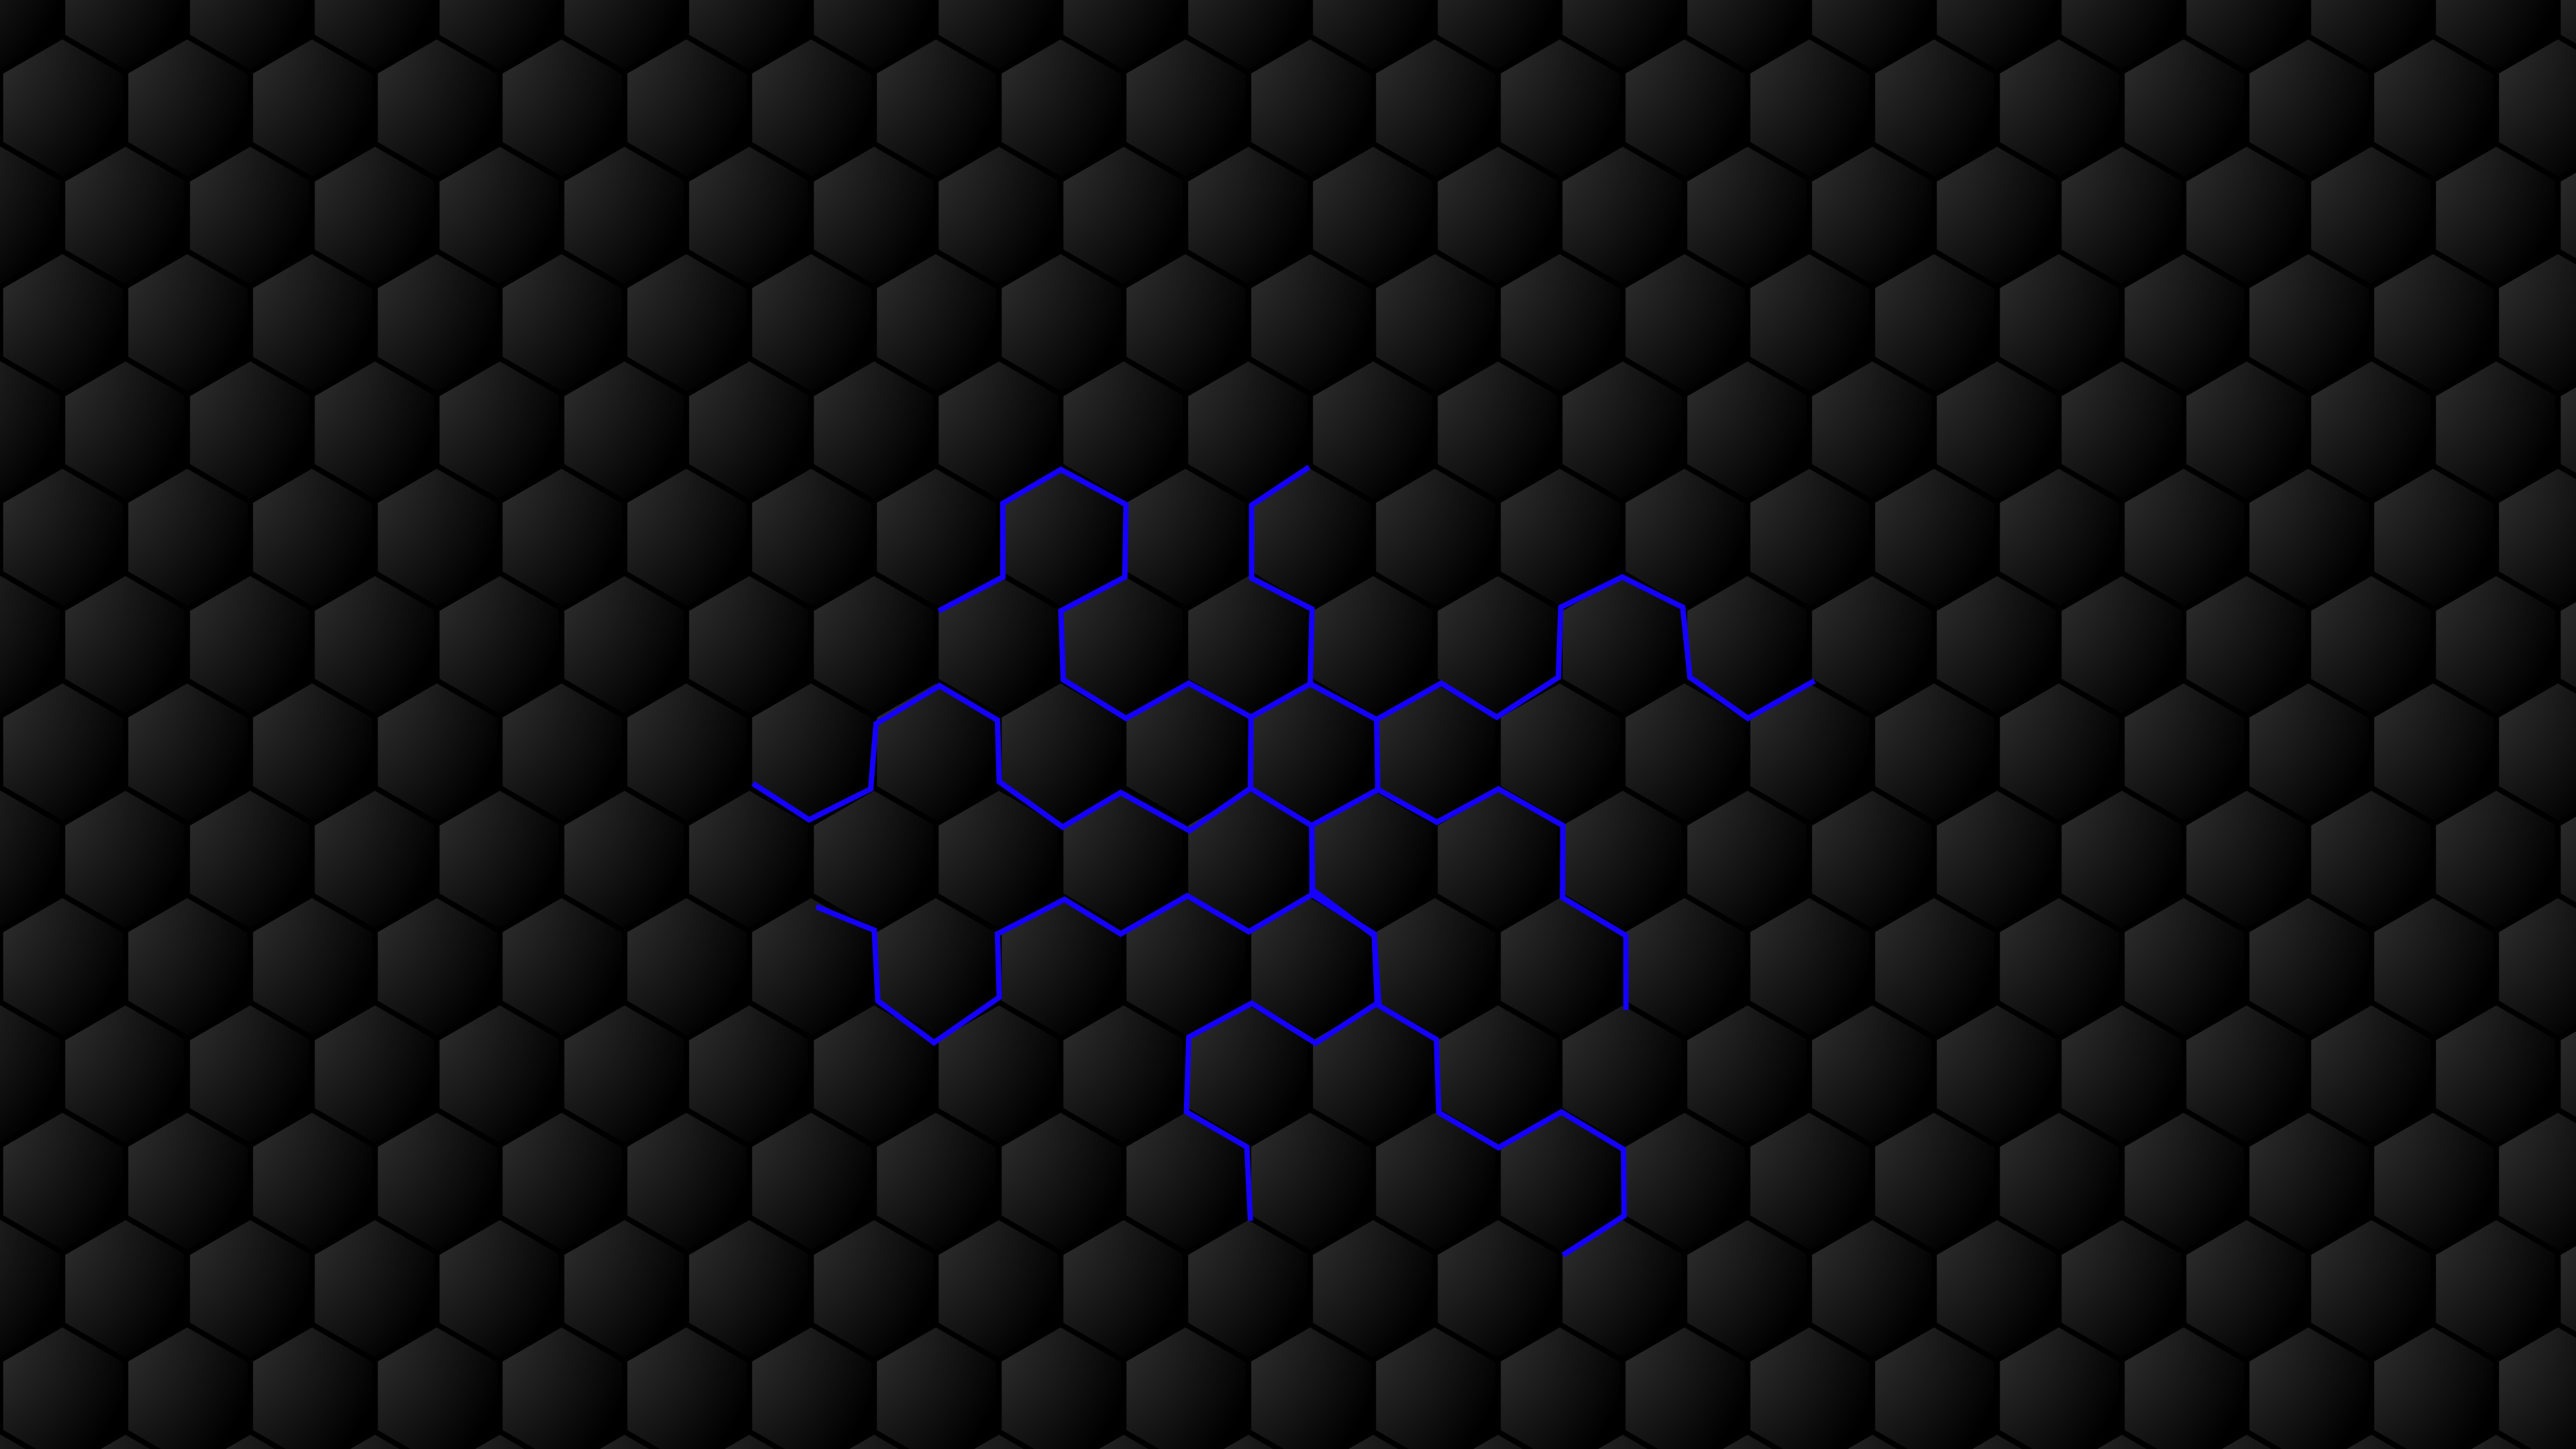 Technology Hexagonal Honeycomb Wallpaper Background Honeycomb Technology  Hexagon Background Image And Wallpaper for Free Download